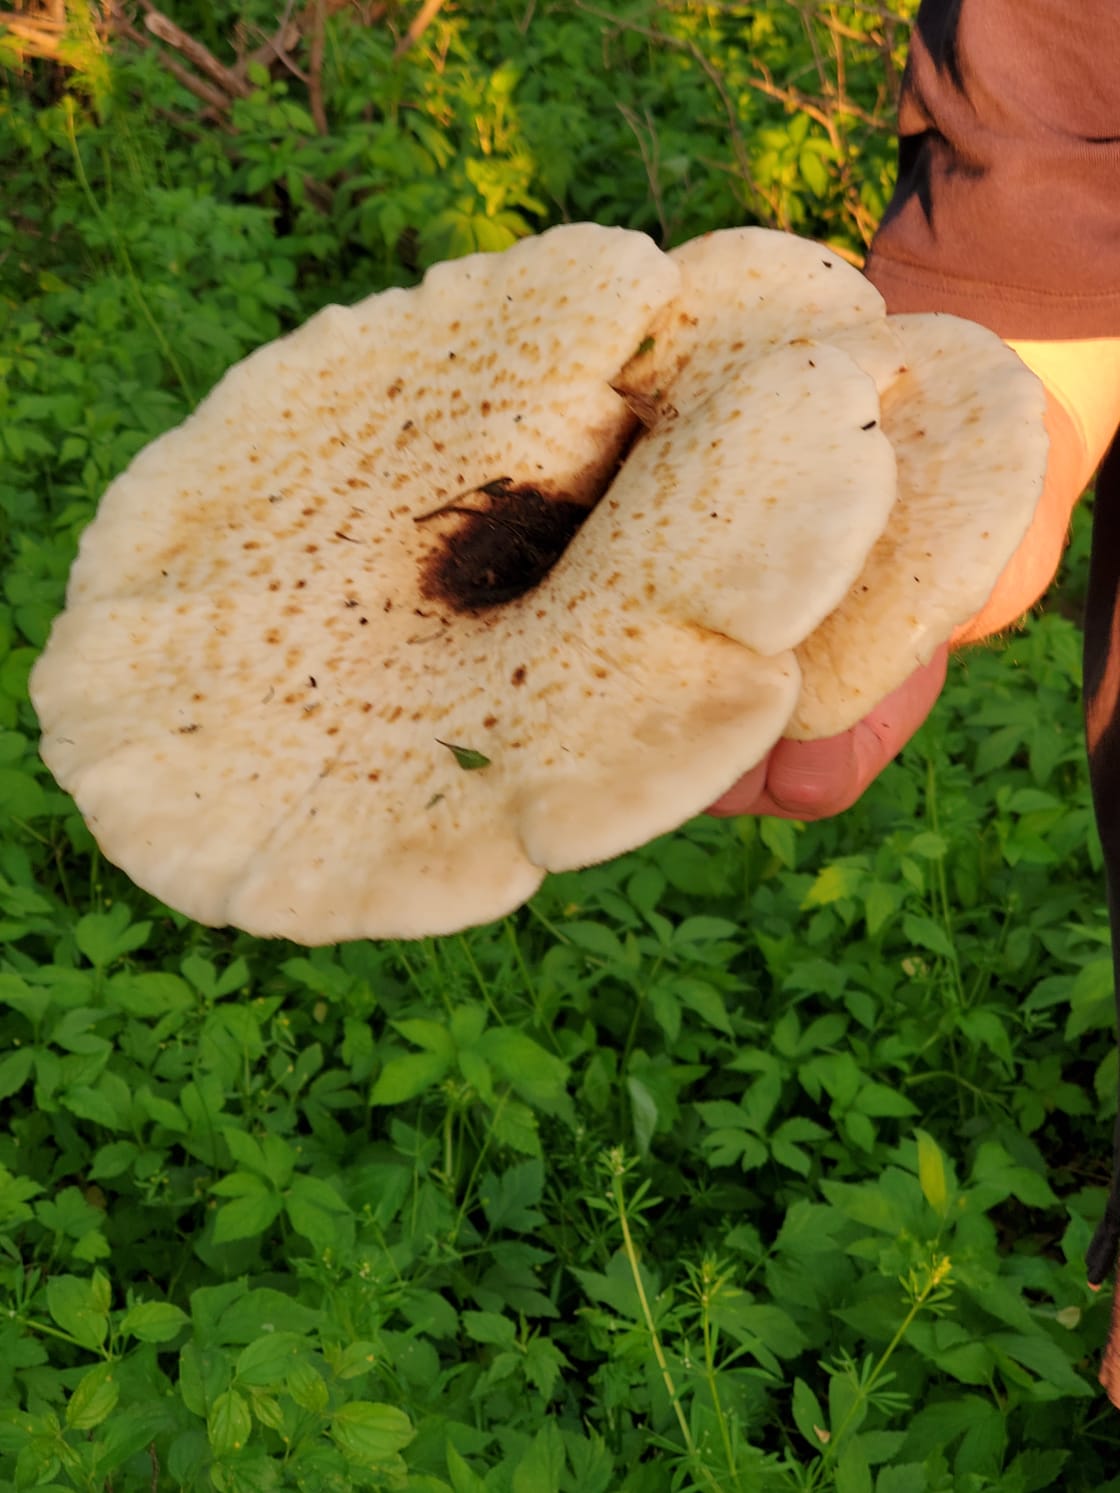 Mushrooms can be found on your walk. 